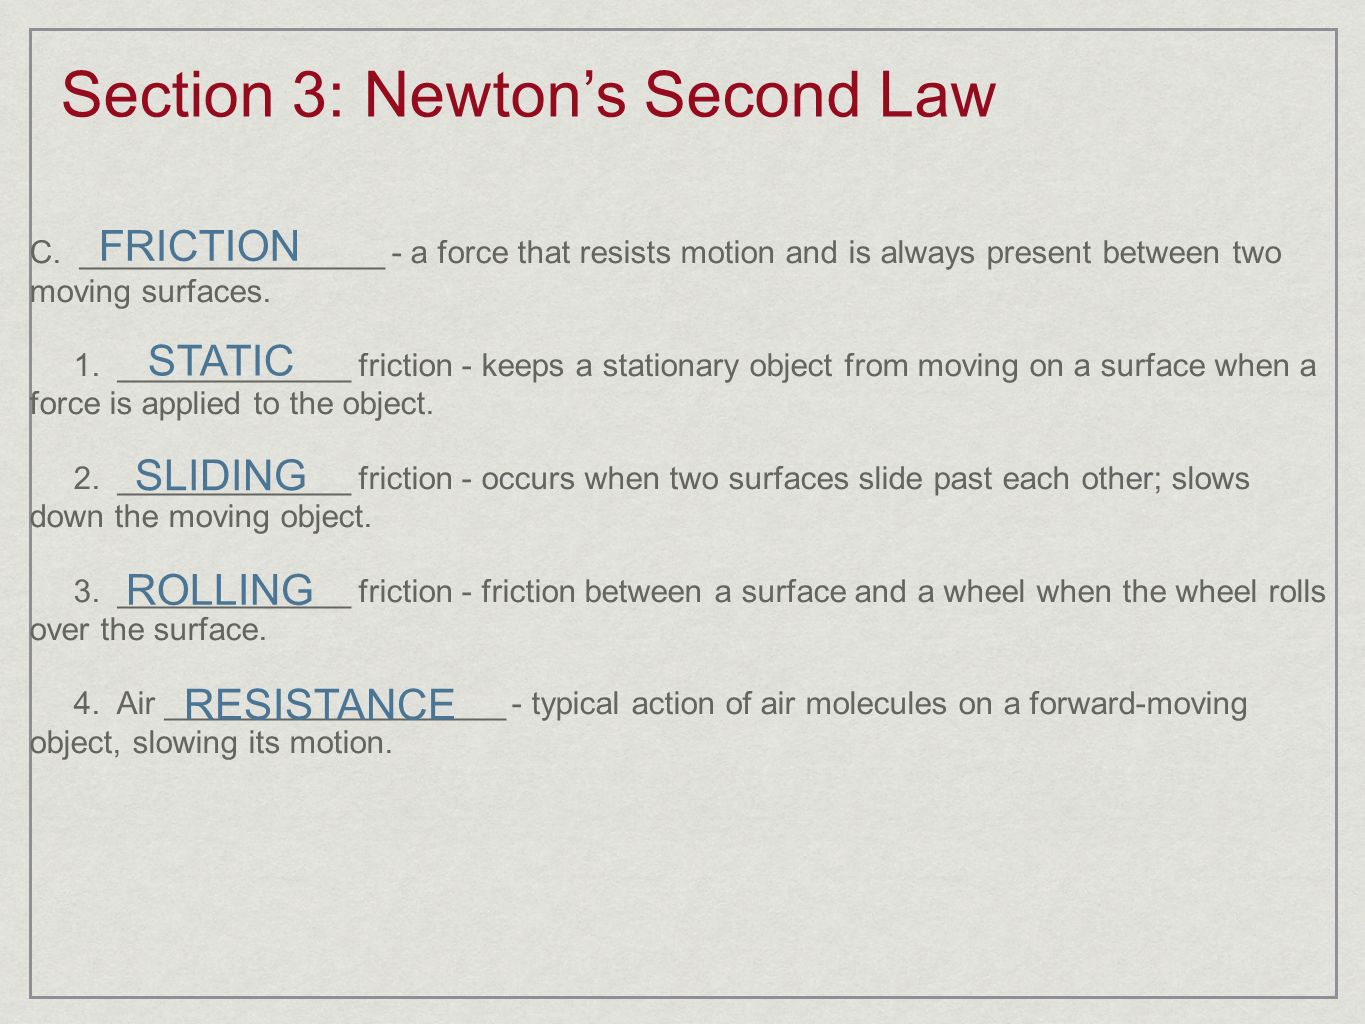 Section 3: Newton’s Second Law